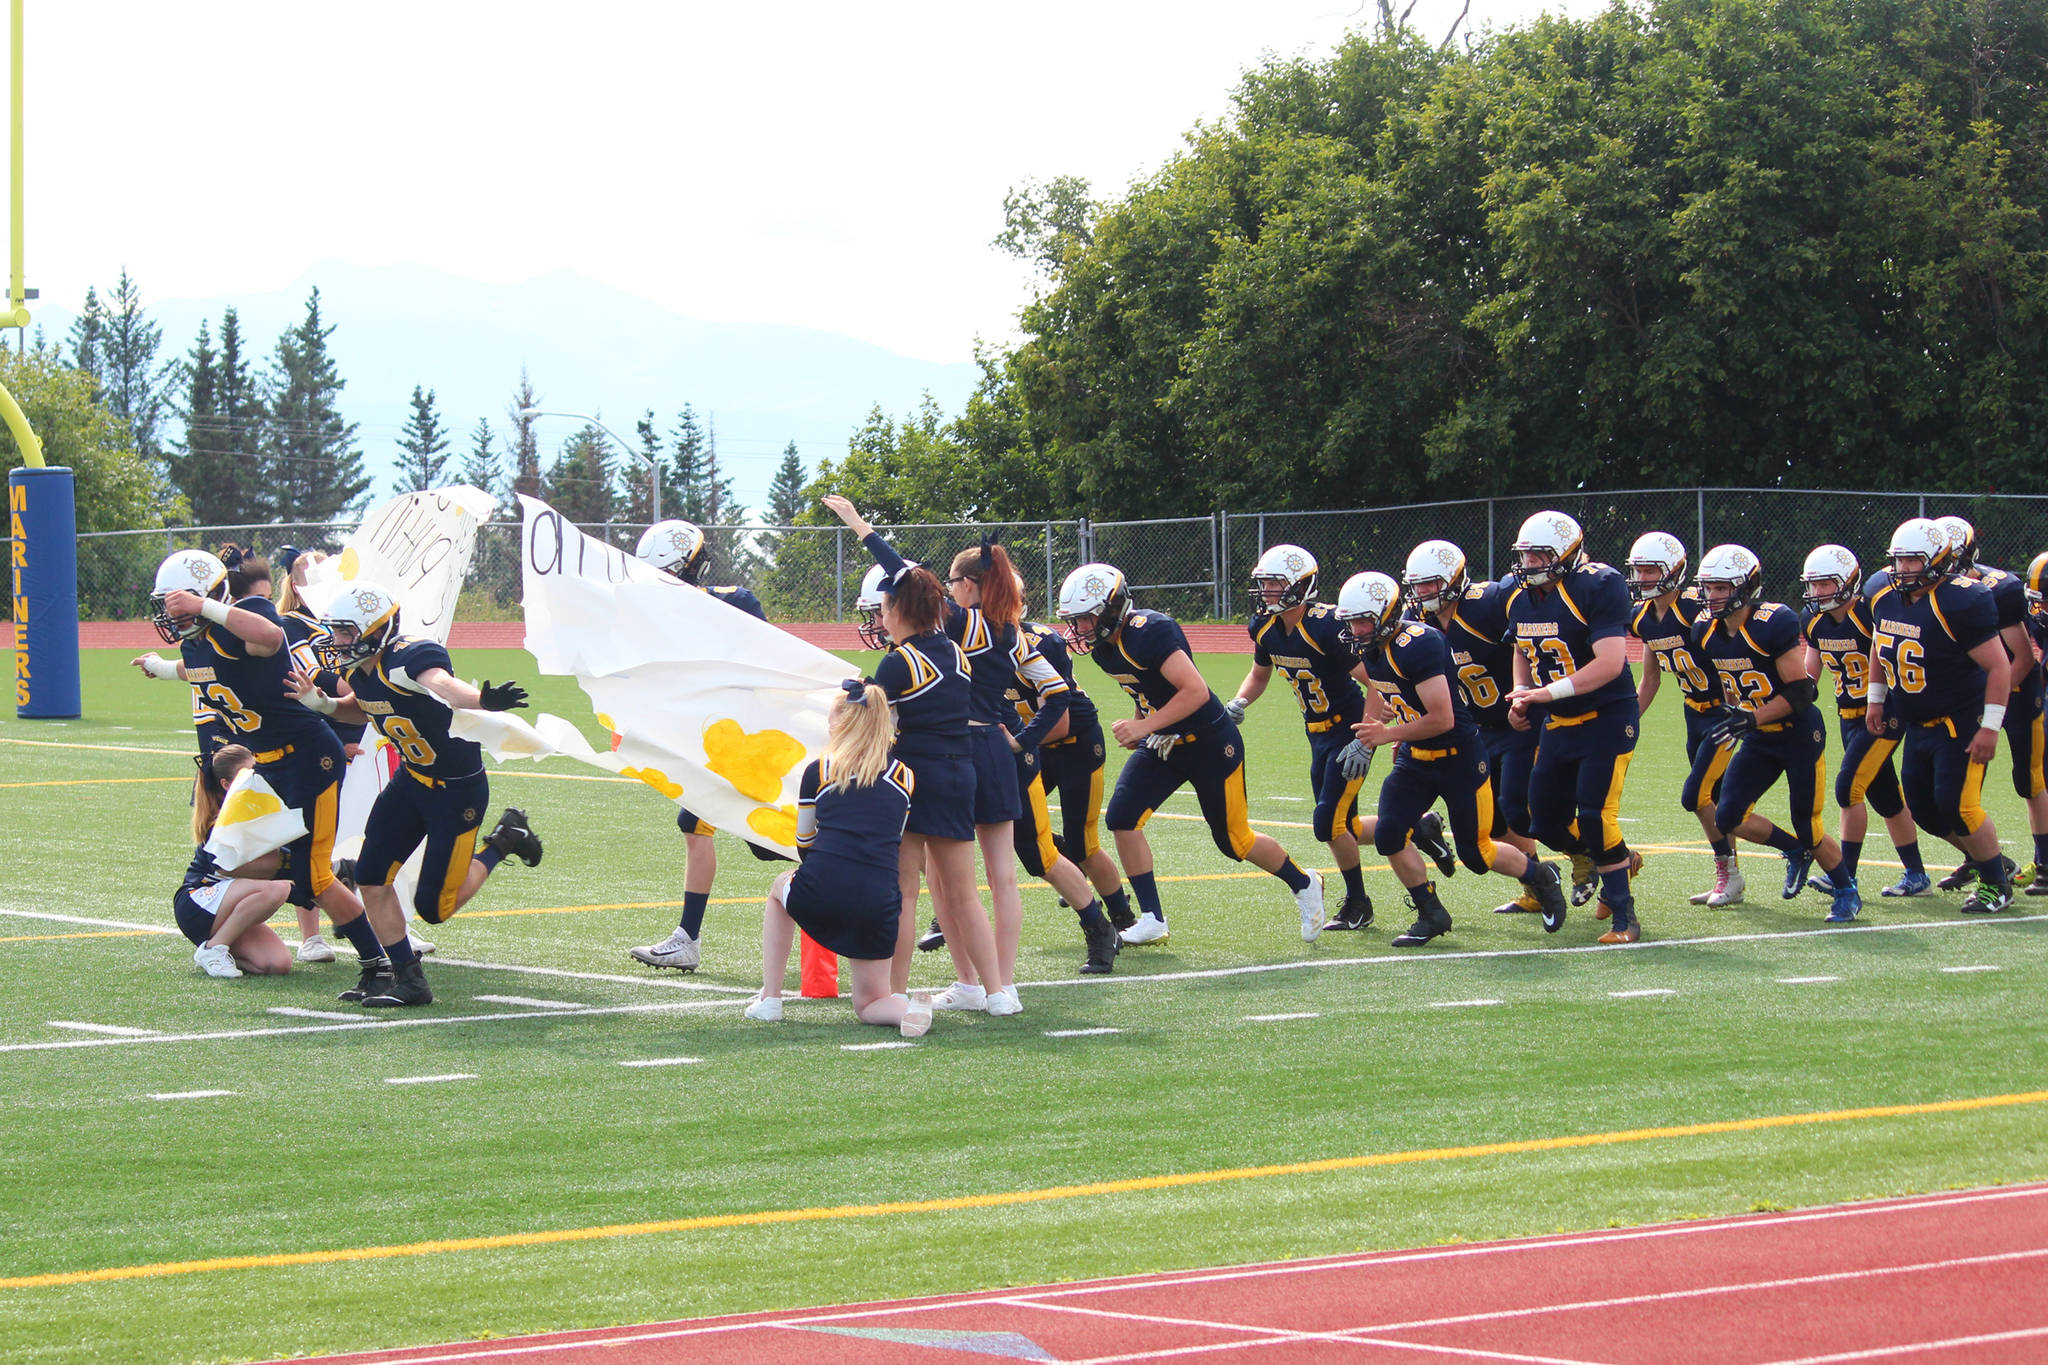 Members of the Homer Mariners varsity football team take the field for their game Saturday, Aug. 12, 2017 at Homer High School in Homer, Alaska. The Mariners lost to Kodiak 21-8. (Photo by Megan Pacer/Homer News)